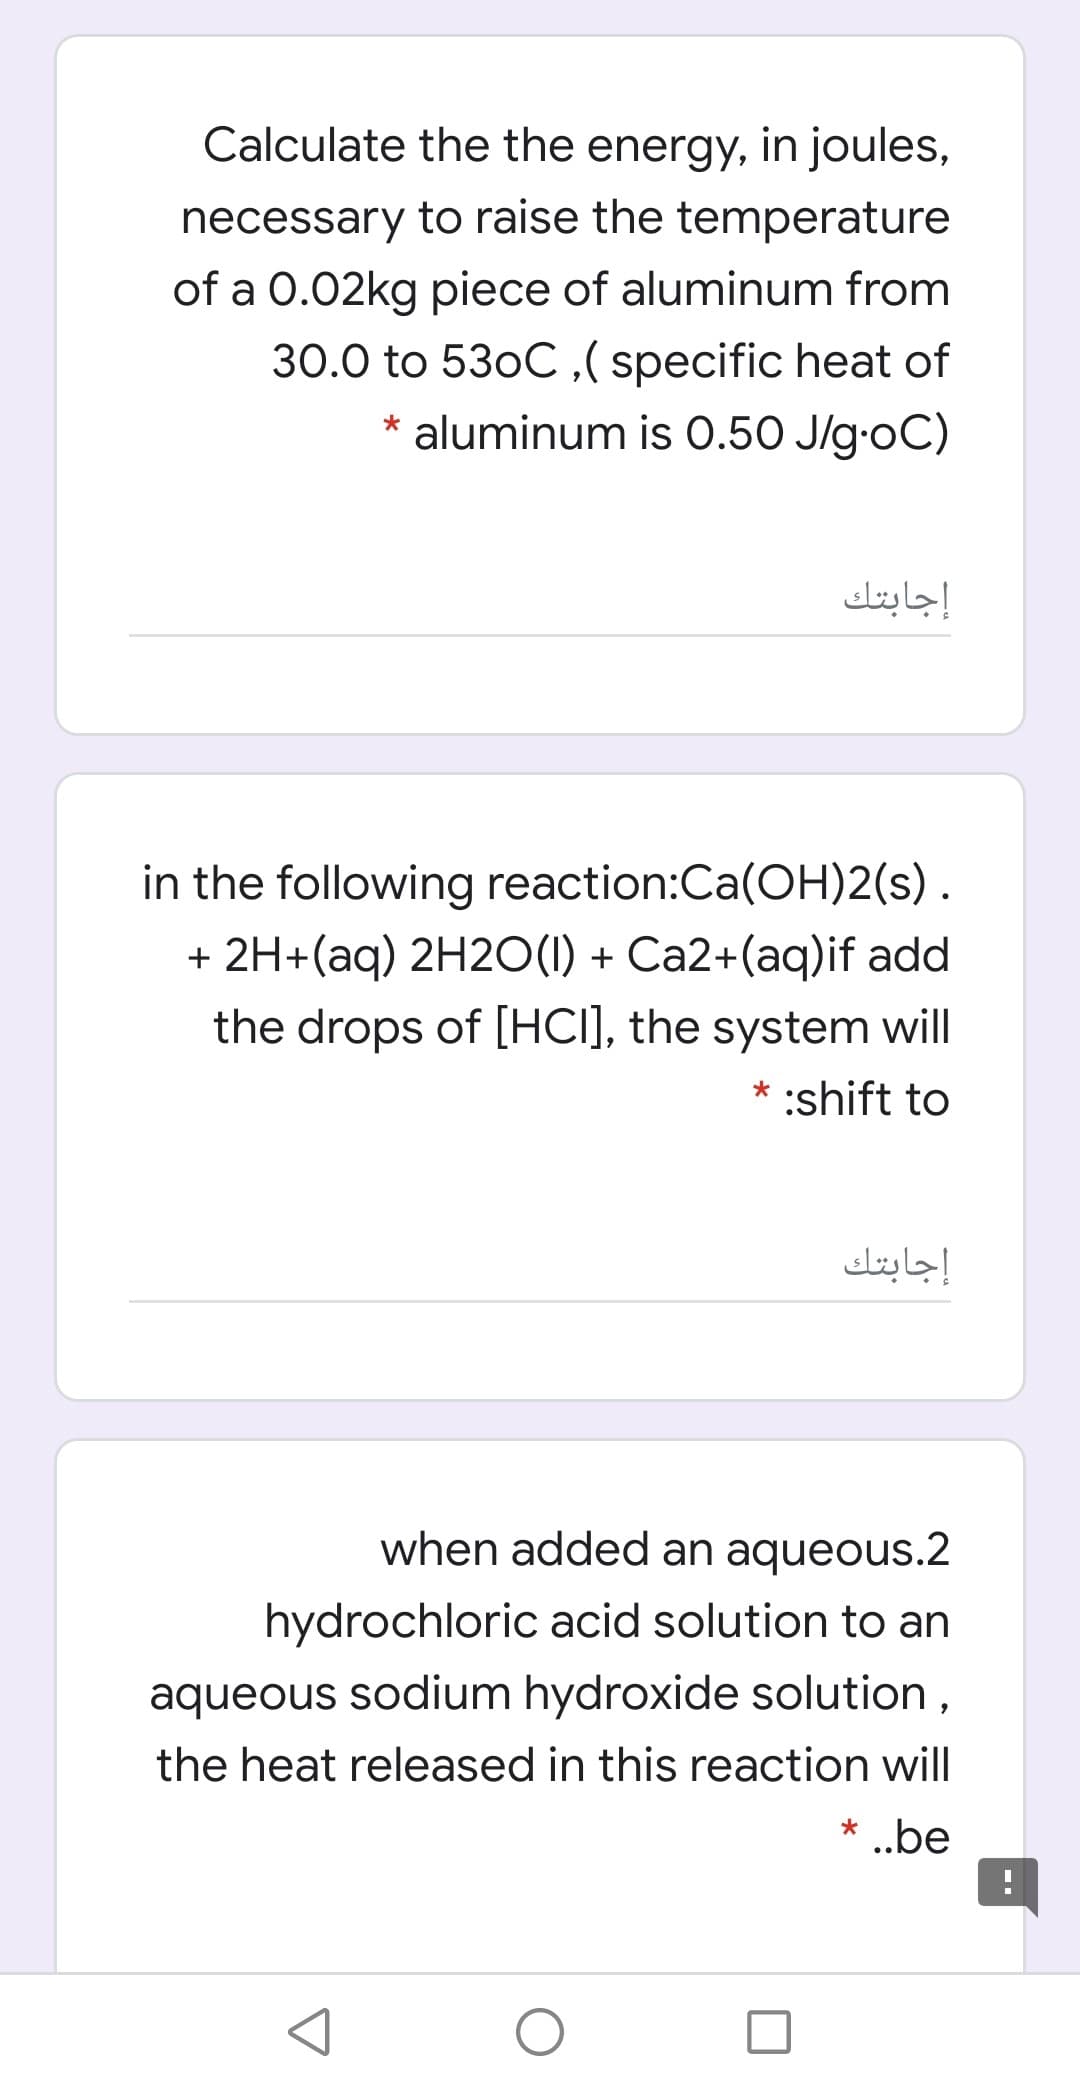 Calculate the the energy, in joules,
necessary to raise the temperature
of a 0.02kg piece of aluminum from
30.0 to 530C,( specific heat of
aluminum is O.50 J/g-oC)
إجابتك
in the following reaction:Ca(OH)2(s).
+ 2H+(aq) 2H2O(1) + Ca2+(aq)if add
the drops of [HCI], the system will
* :shift to
إجابتك
when added an aqueous.2
hydrochloric acid solution to an
aqueous sodium hydroxide solution,
the heat released in this reaction will
* .be
